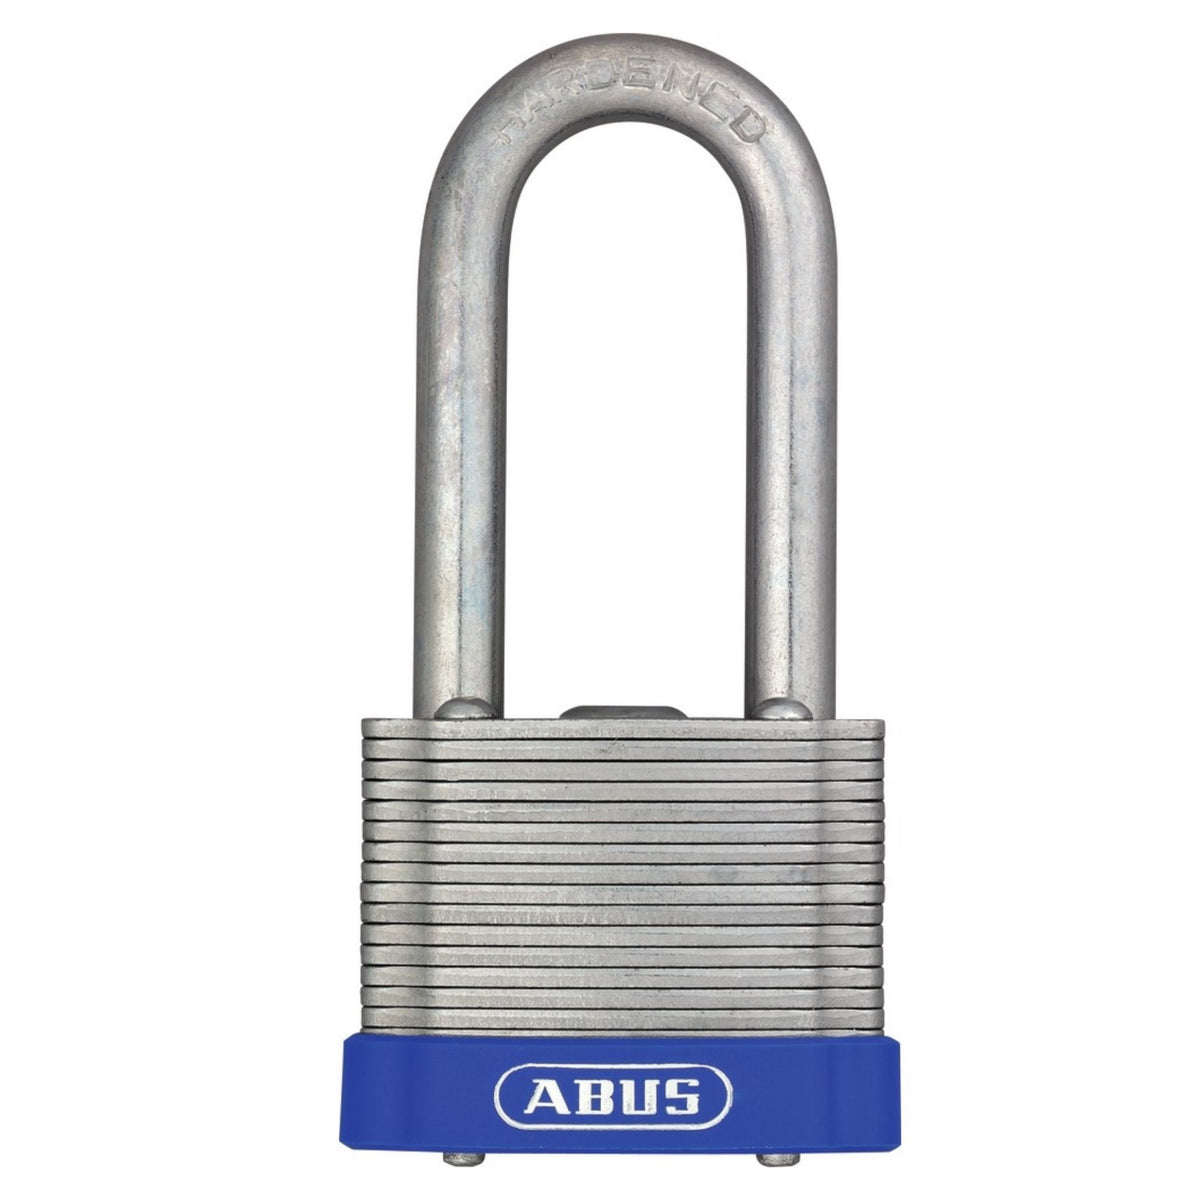 Abus 41/50HB50 Lock Laminated Steel Padlocks with 2-Inch Shackle - The Lock Source